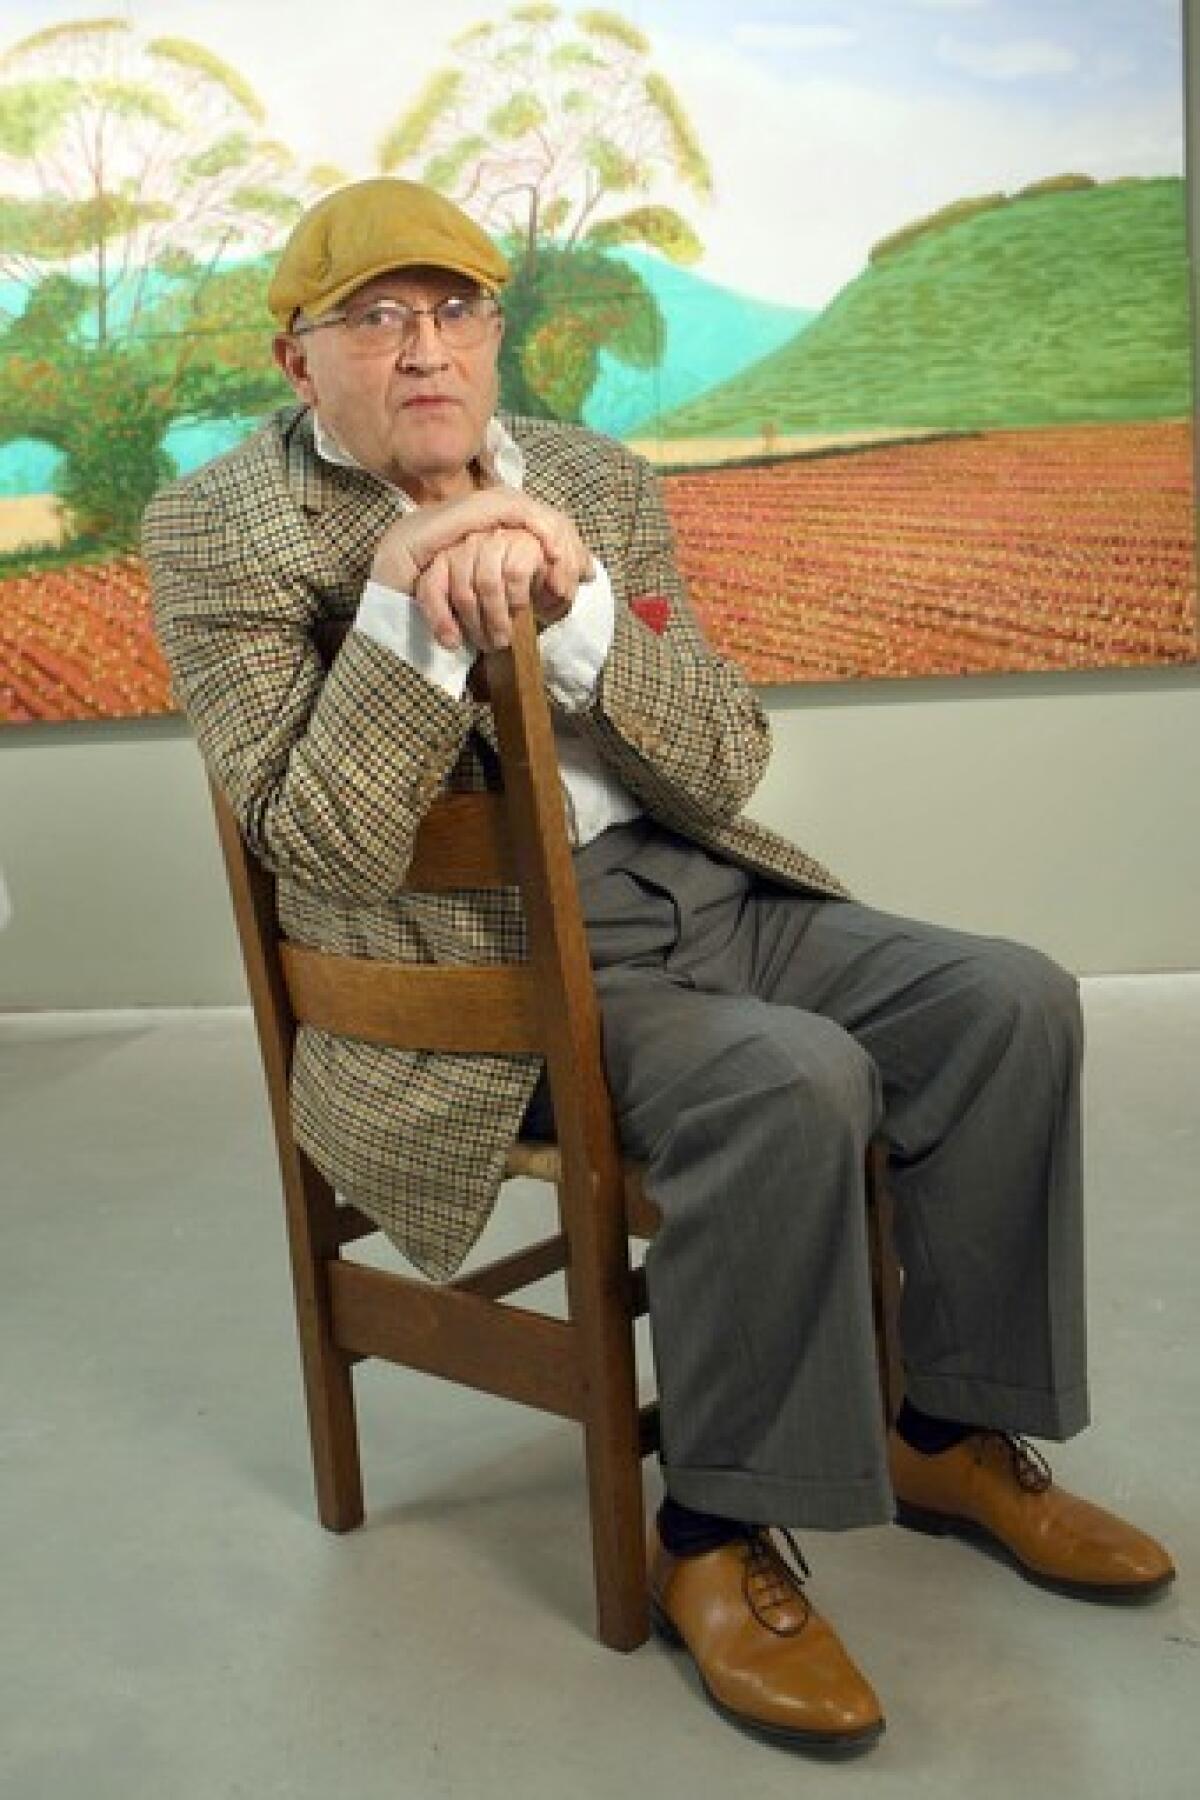 Hockney is not slowing down at 72. He's had three big exhibitions this year and is enjoying a "late flowering."